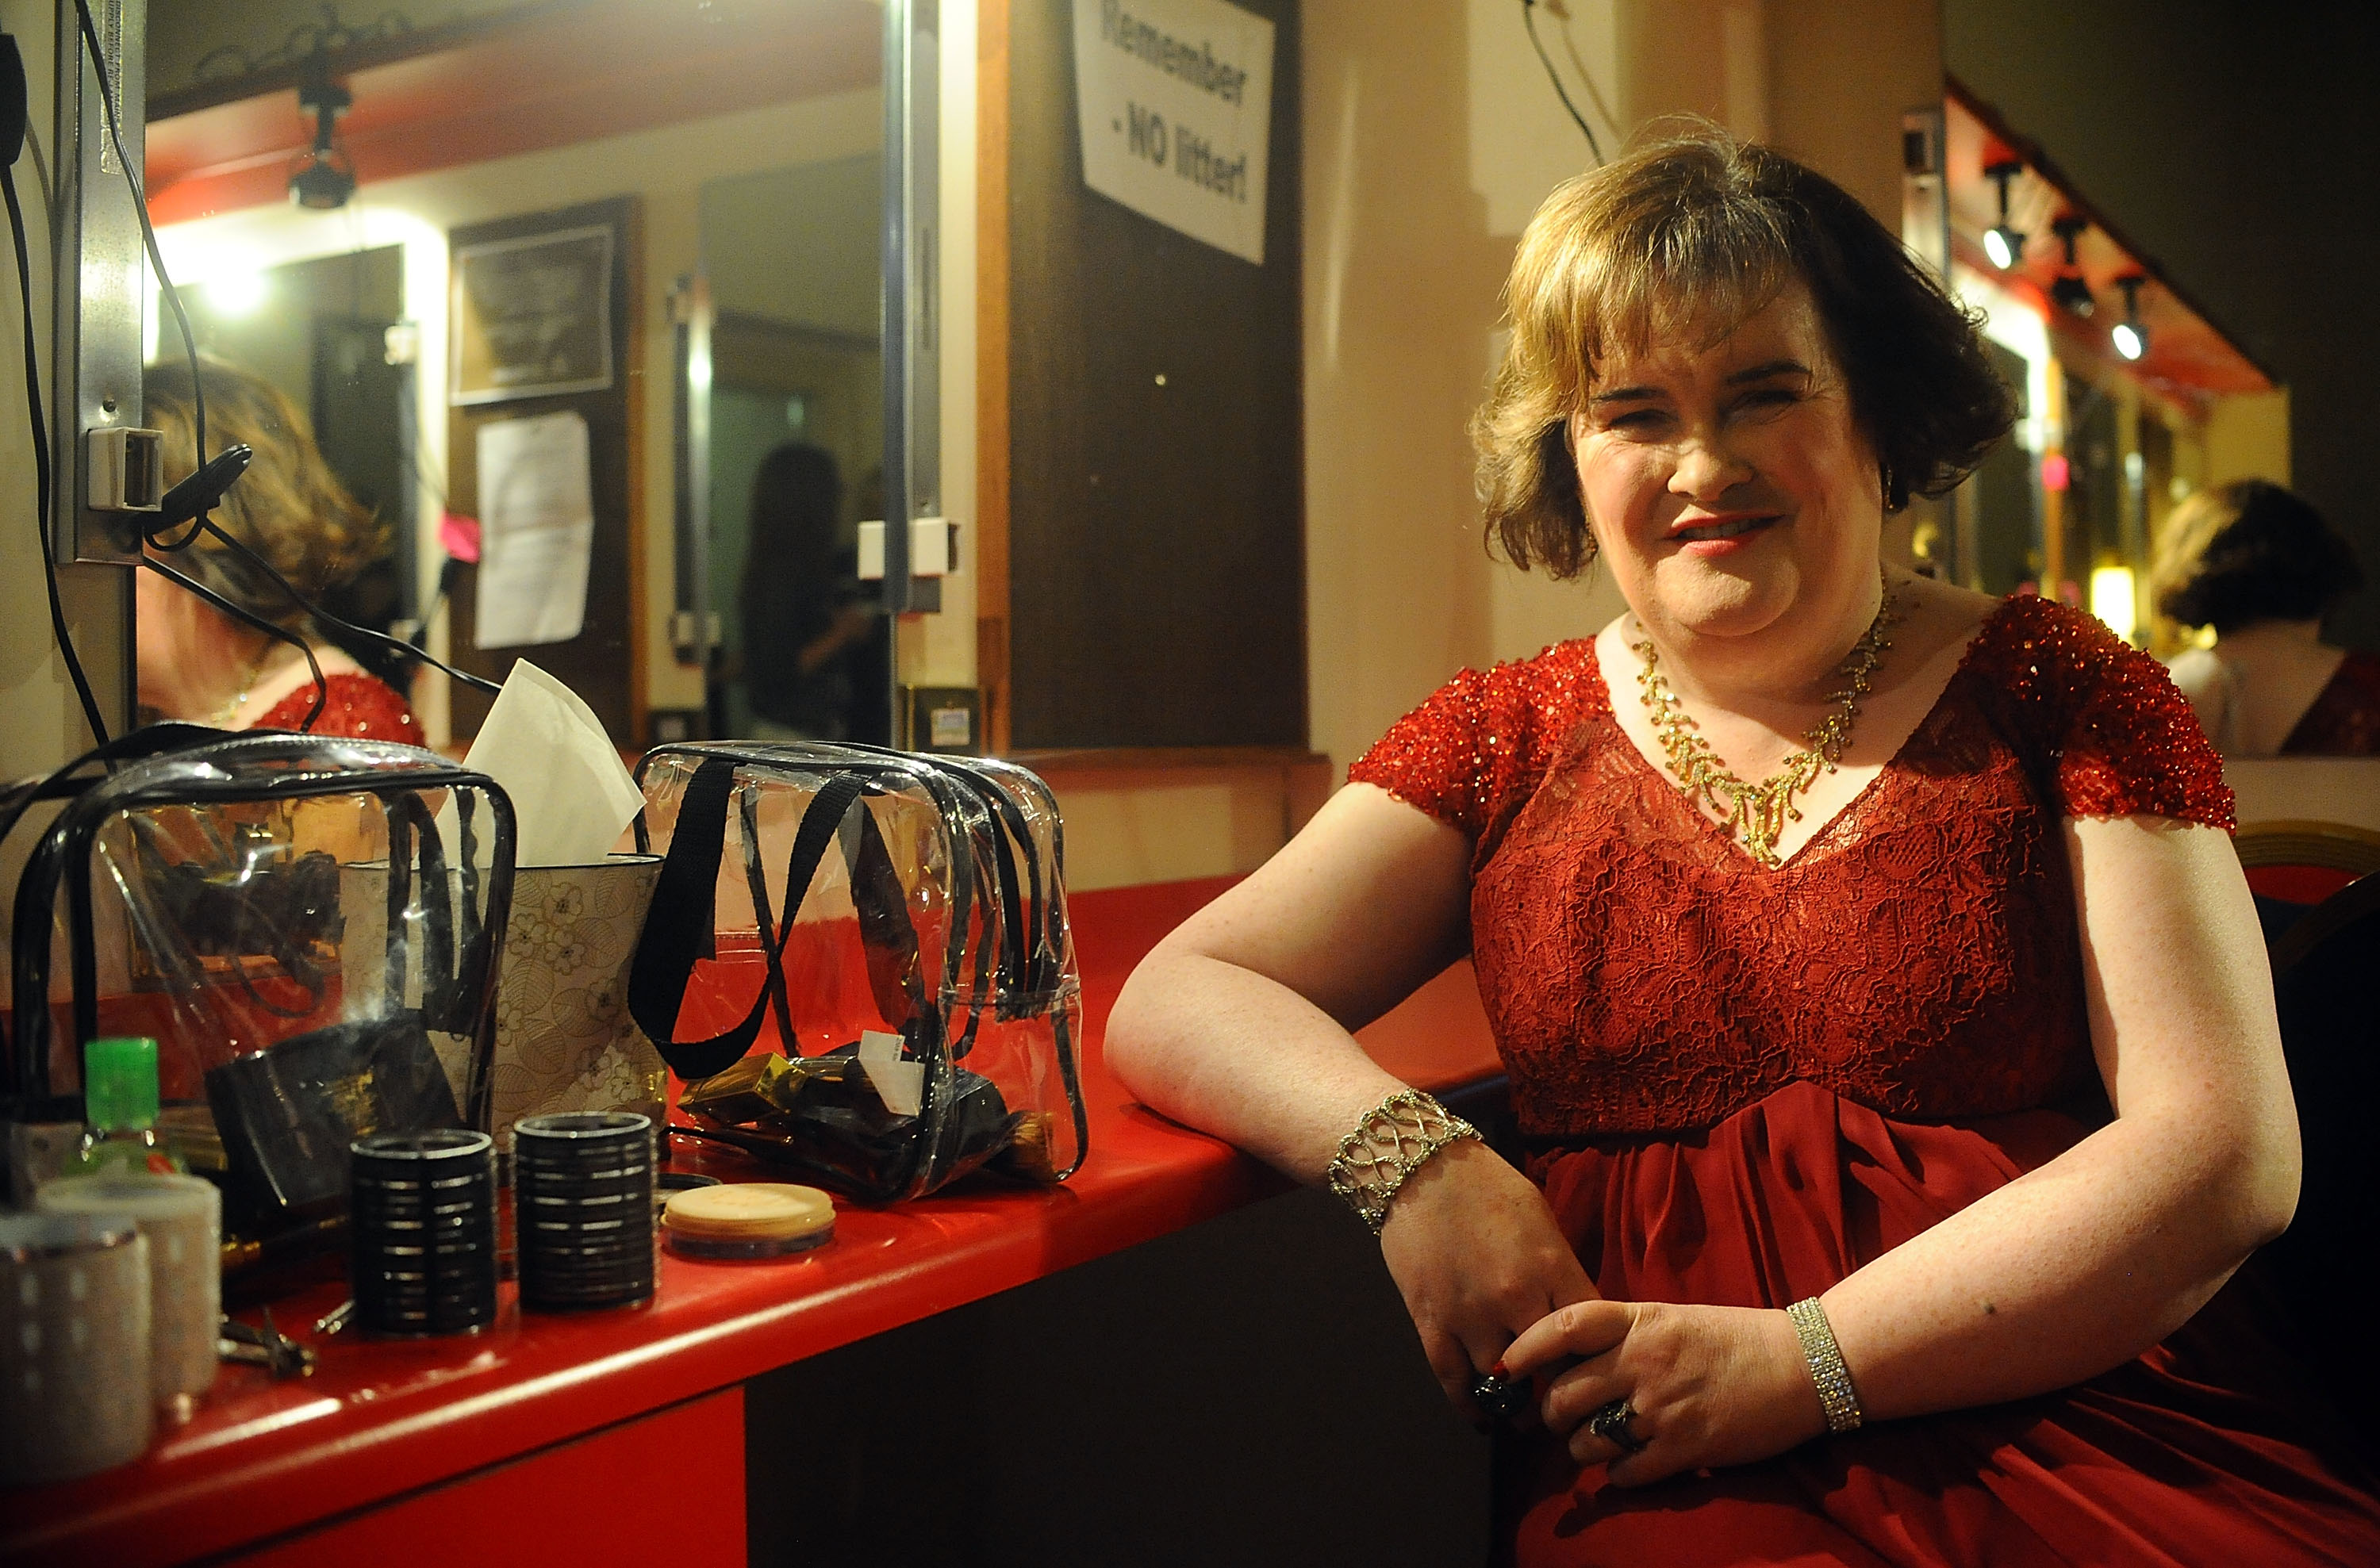 Susan Boyle poses for a portrait in her dressing room on July 4, 2013 in Aberdeen, Scotland | Source: Getty Images